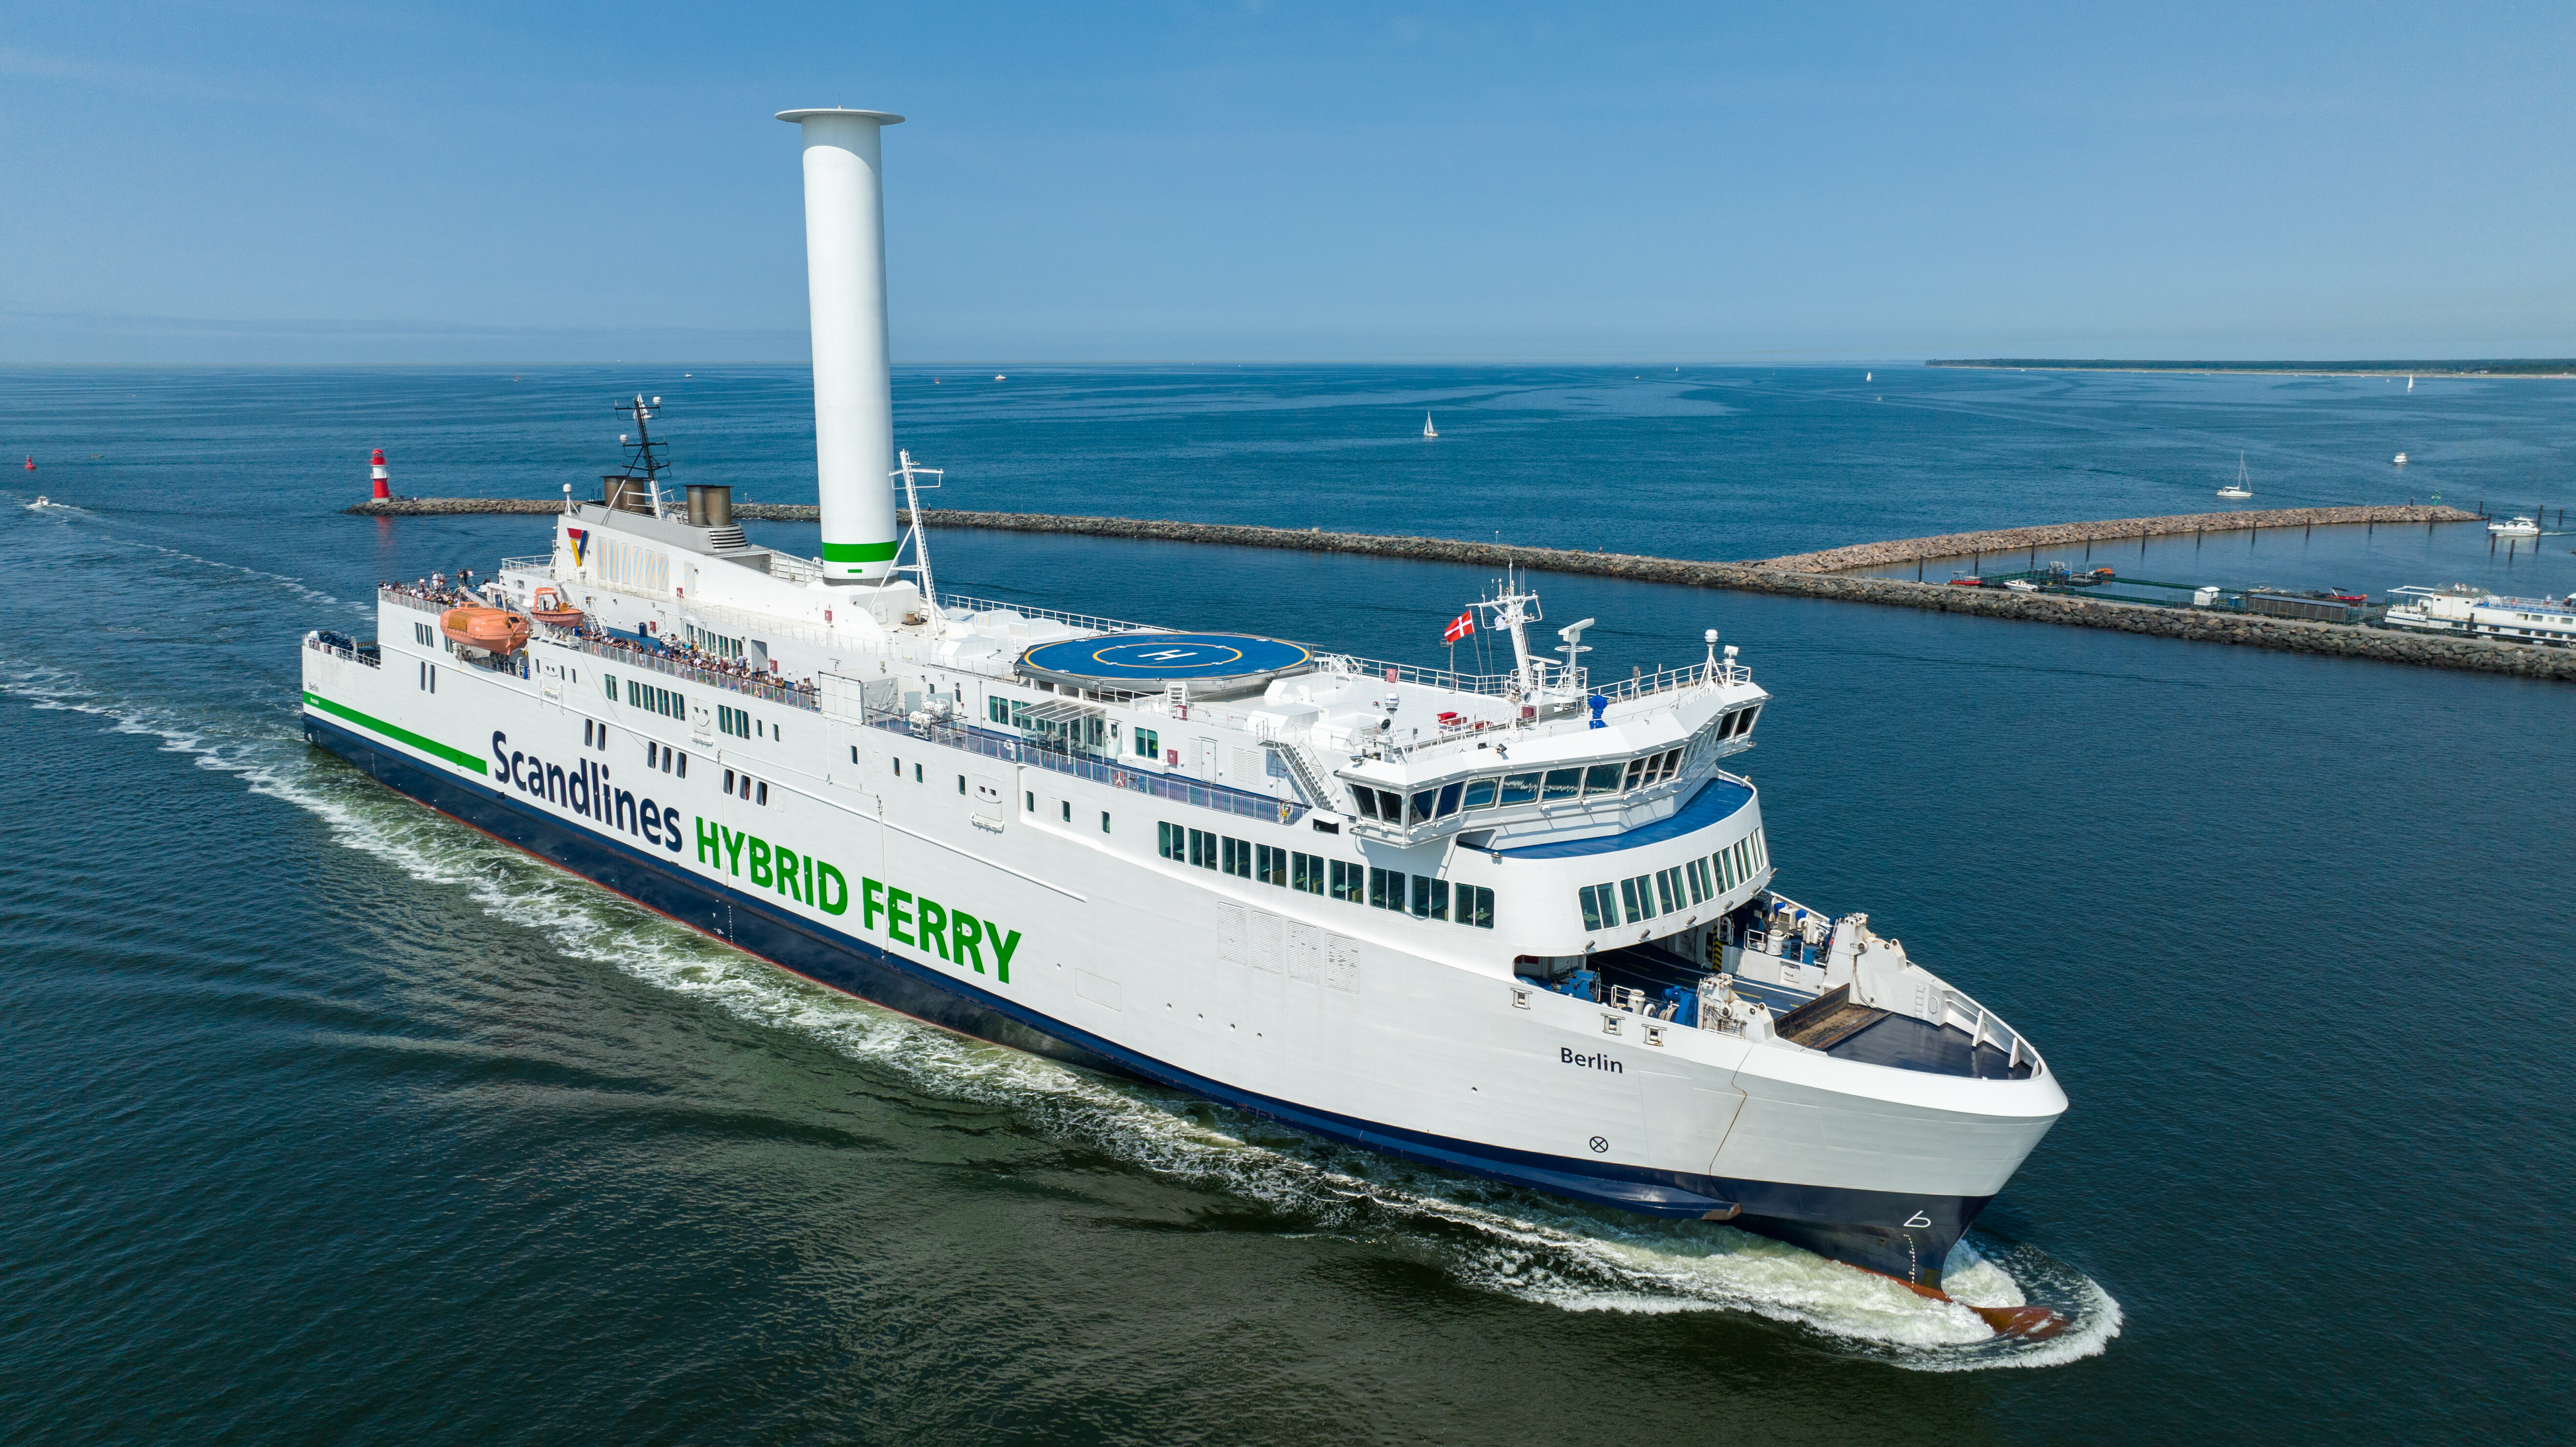 Scandlines Hybrid Ferry sails over the sea To Denmark